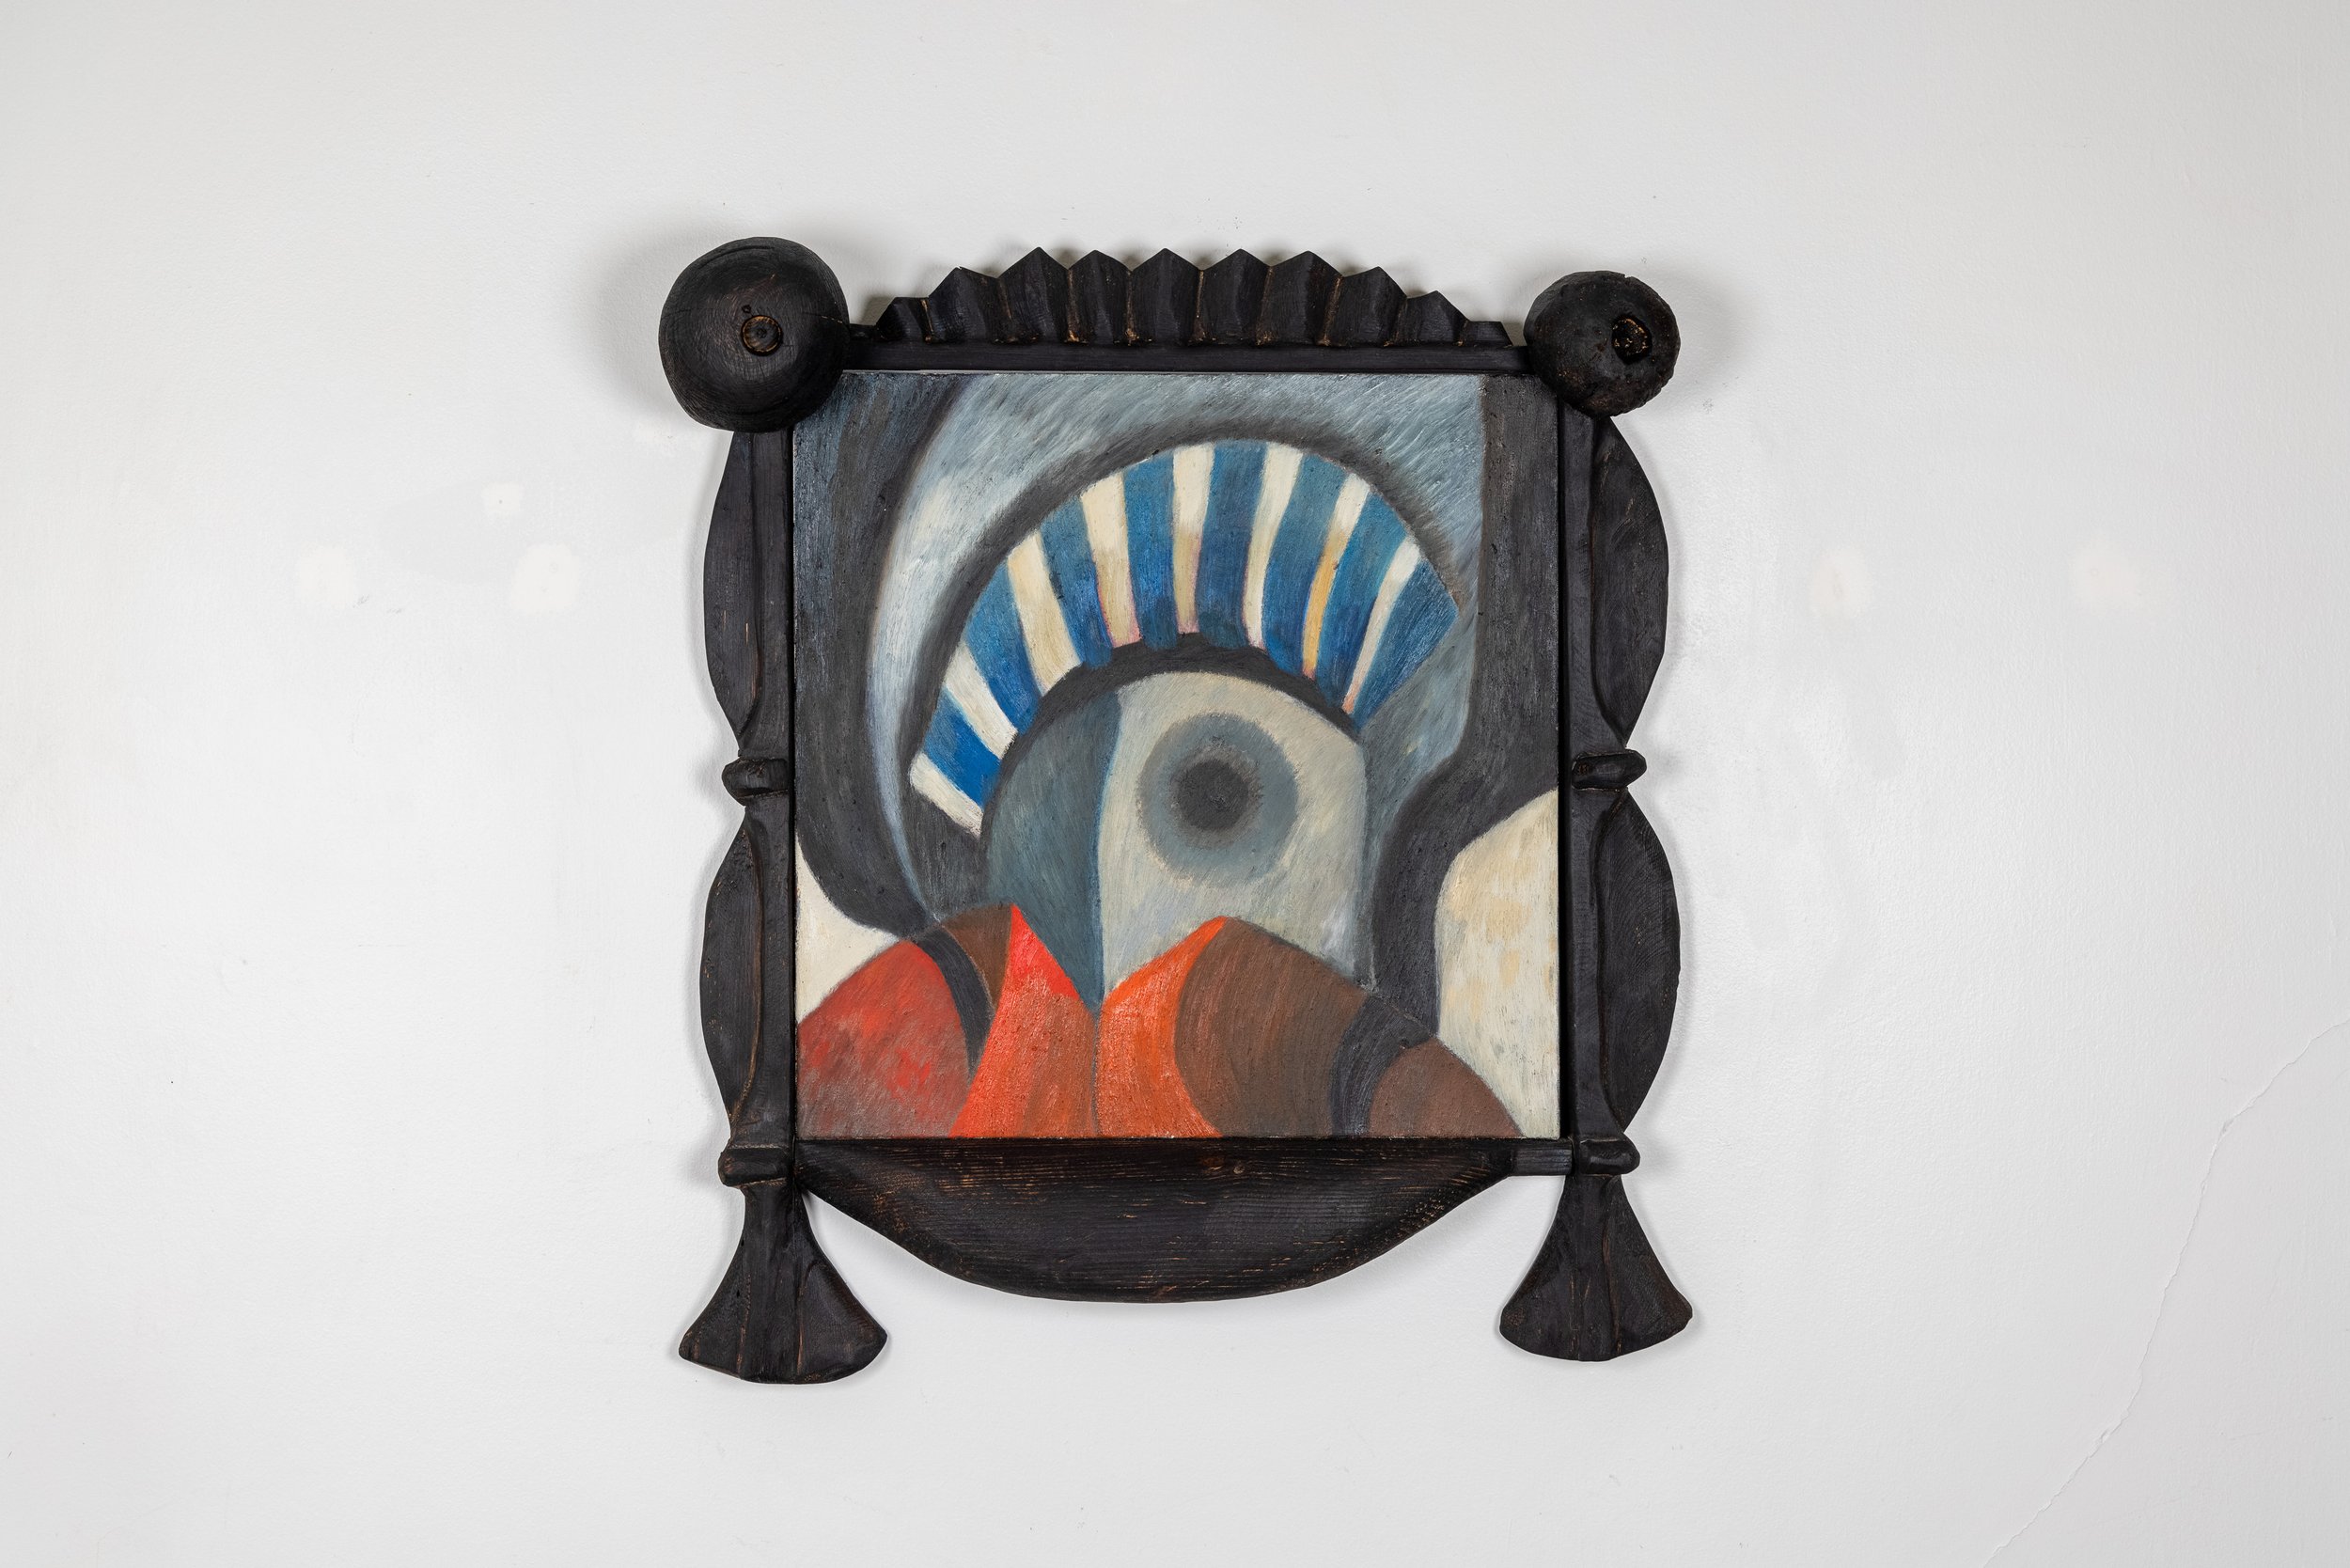 Miss Cantine, 2021, Oil on canvas in charred wood frame, 30 x 28 x 6 inches